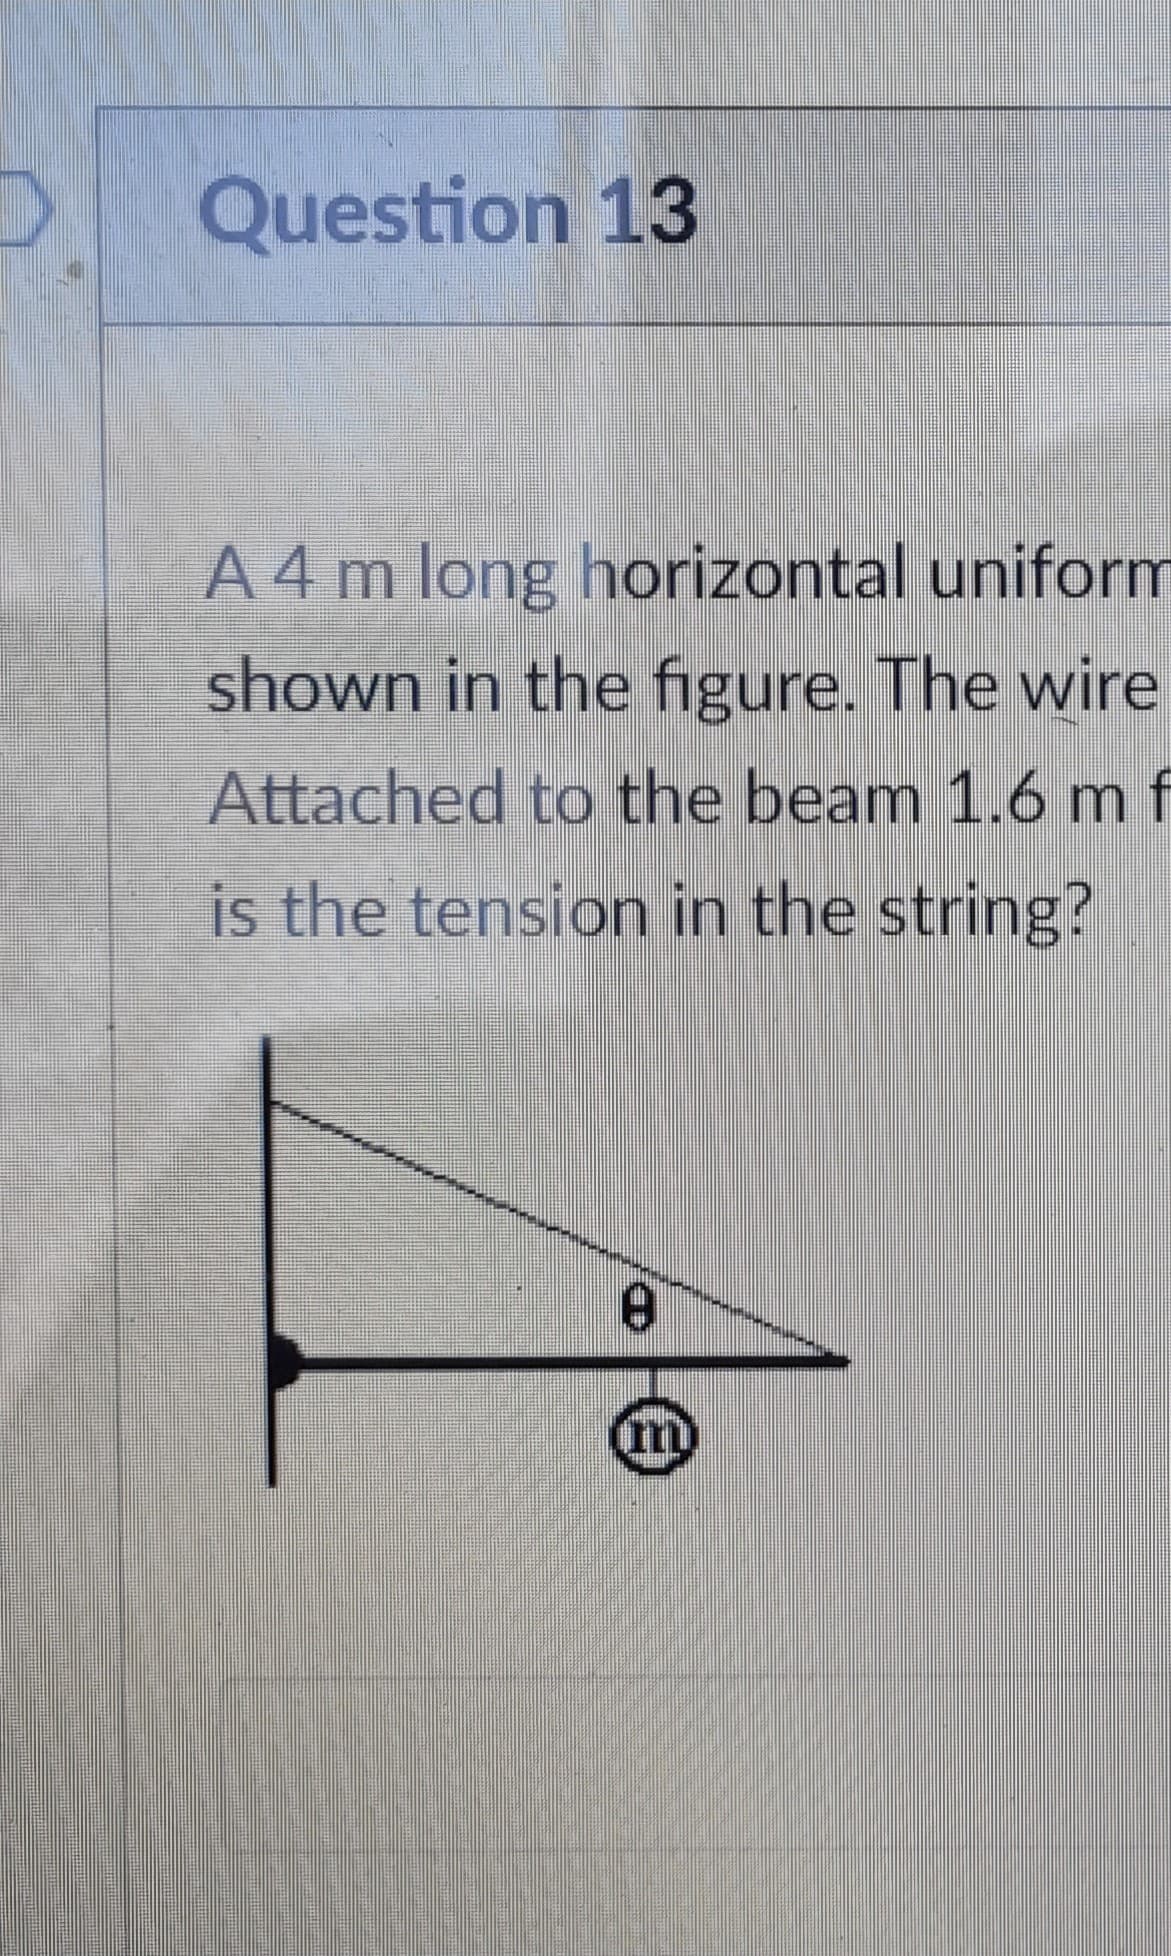 Question 13
A 4 m long horizontal uniform
shown in the figure. The wire
Attached to the beam 1.6 m f
is the tension in the string?
8
m